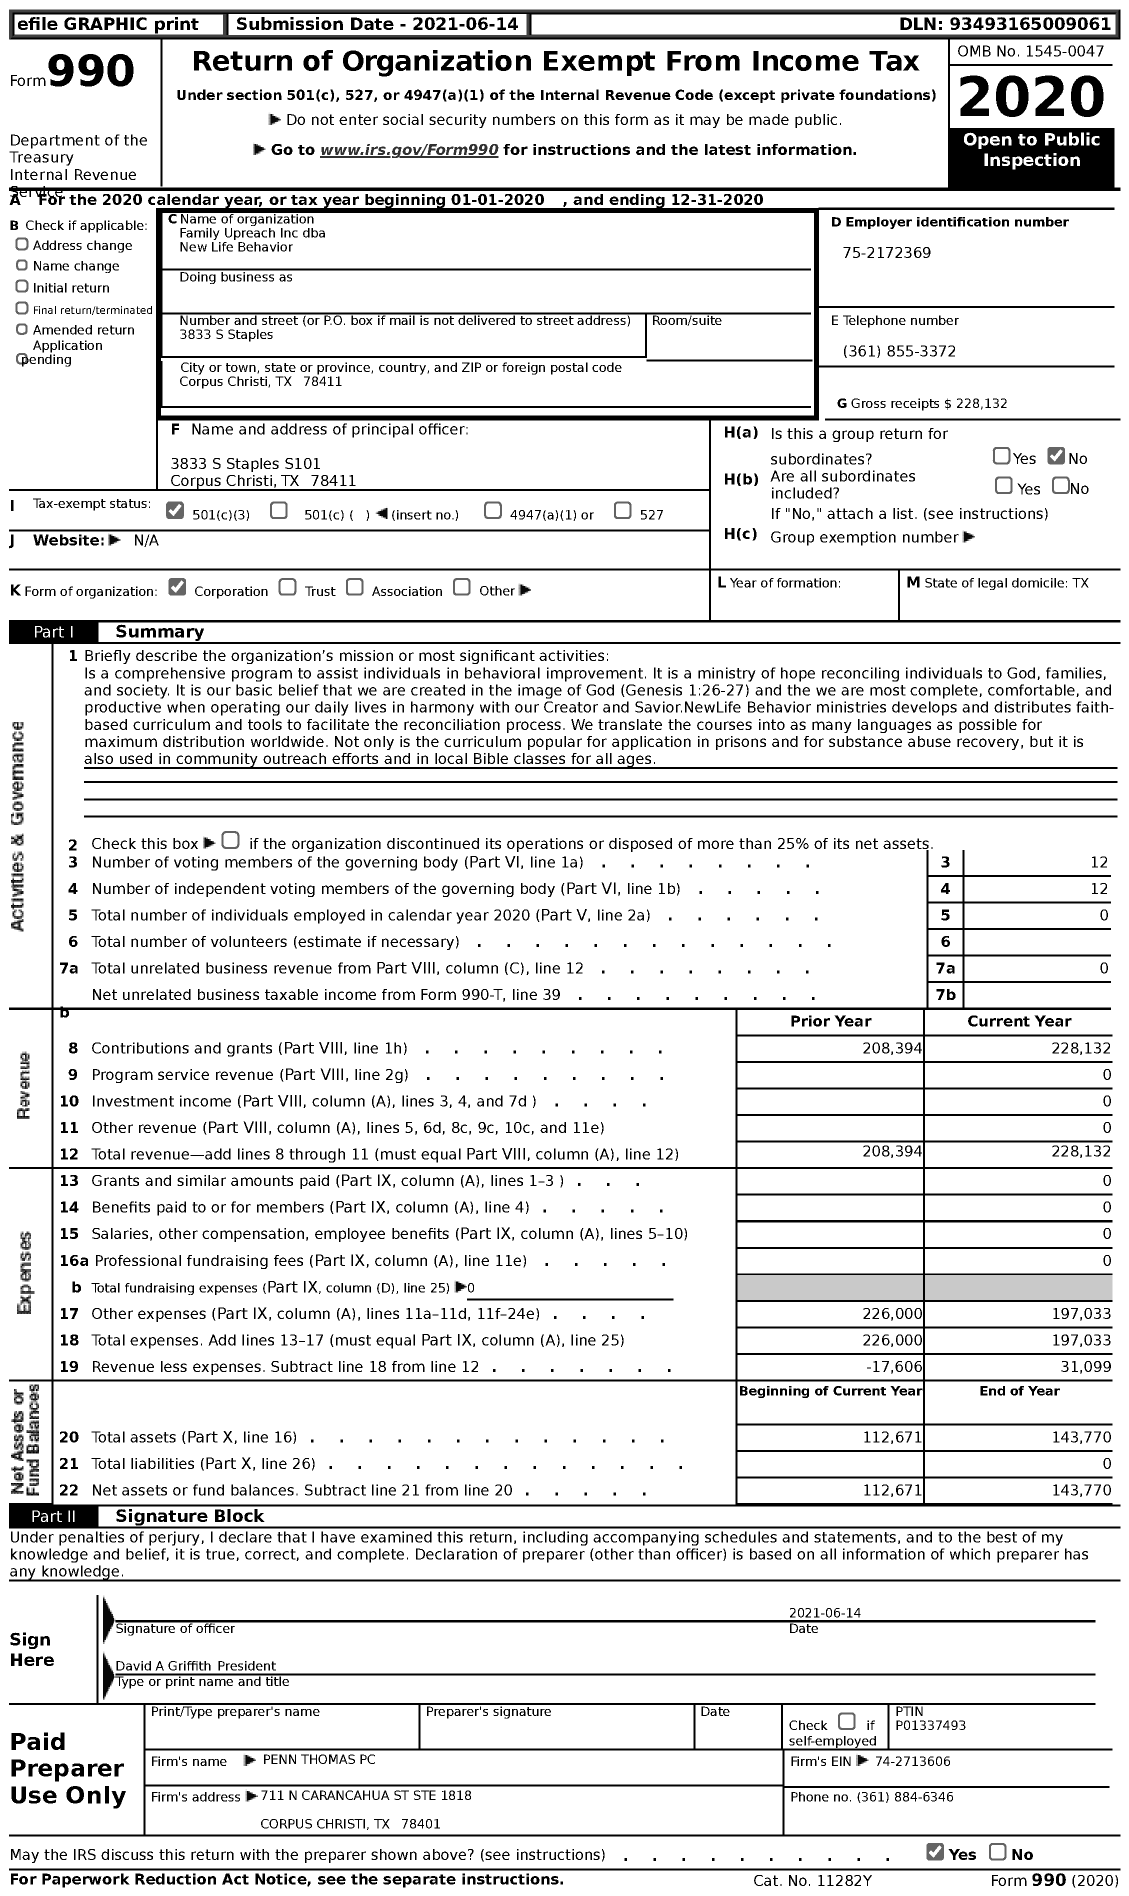 Image of first page of 2020 Form 990 for New Life Behavior